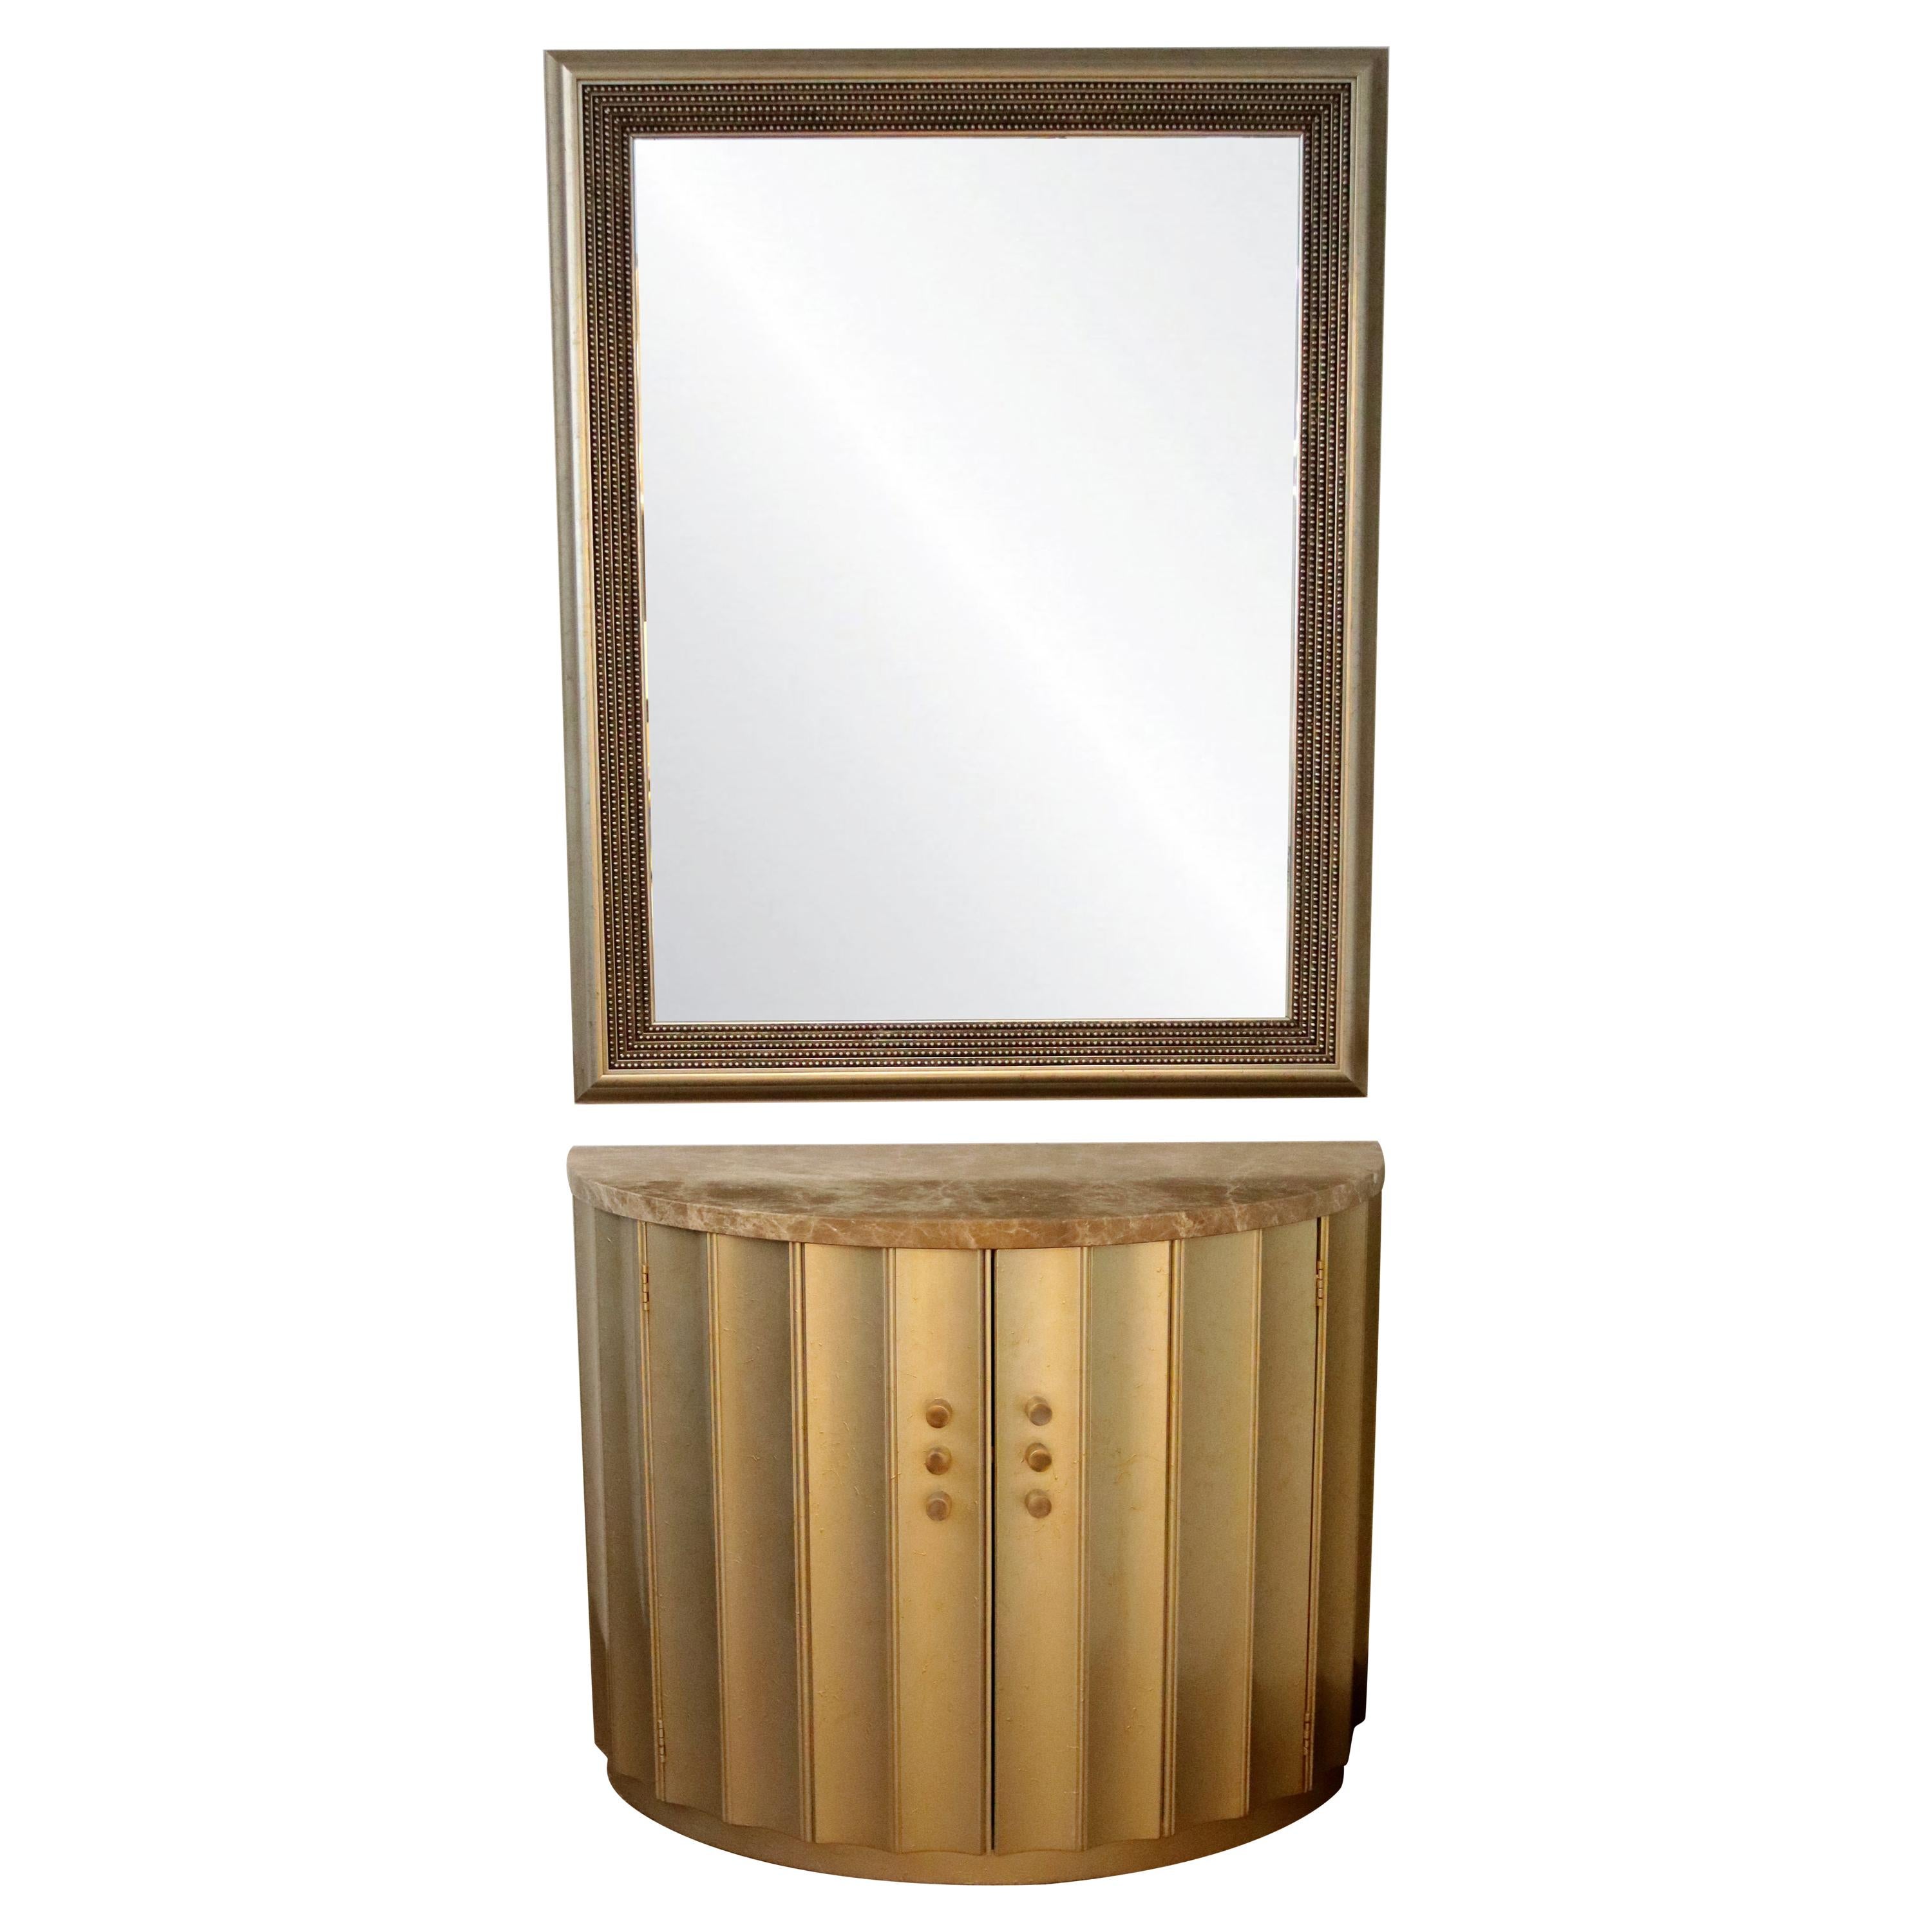 Contemporary Modern Gold Gilt Wall Mirror Demilume Console Foyer Table Cabinet